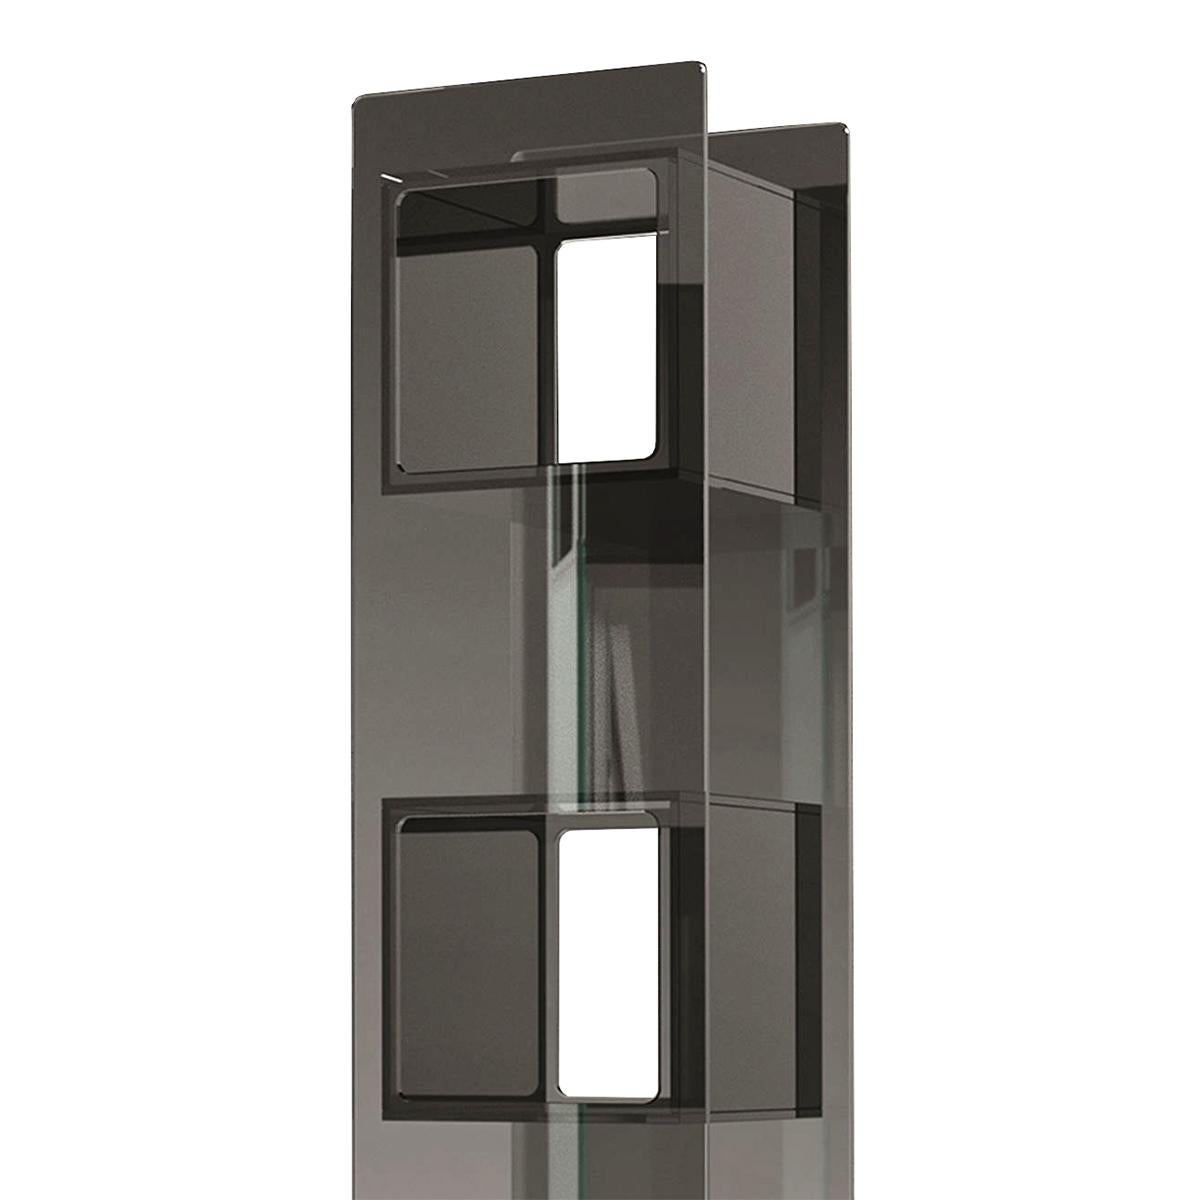 Bookcase Parts square glass with structure in welded smoked
glass, 10mm thickness. With 3 cubes in welded blackened glass,
10mm thickness.
Also available with welded clear glass structure, 10mm thickness.
With 3 cubes in welded smocked glass, 10mm